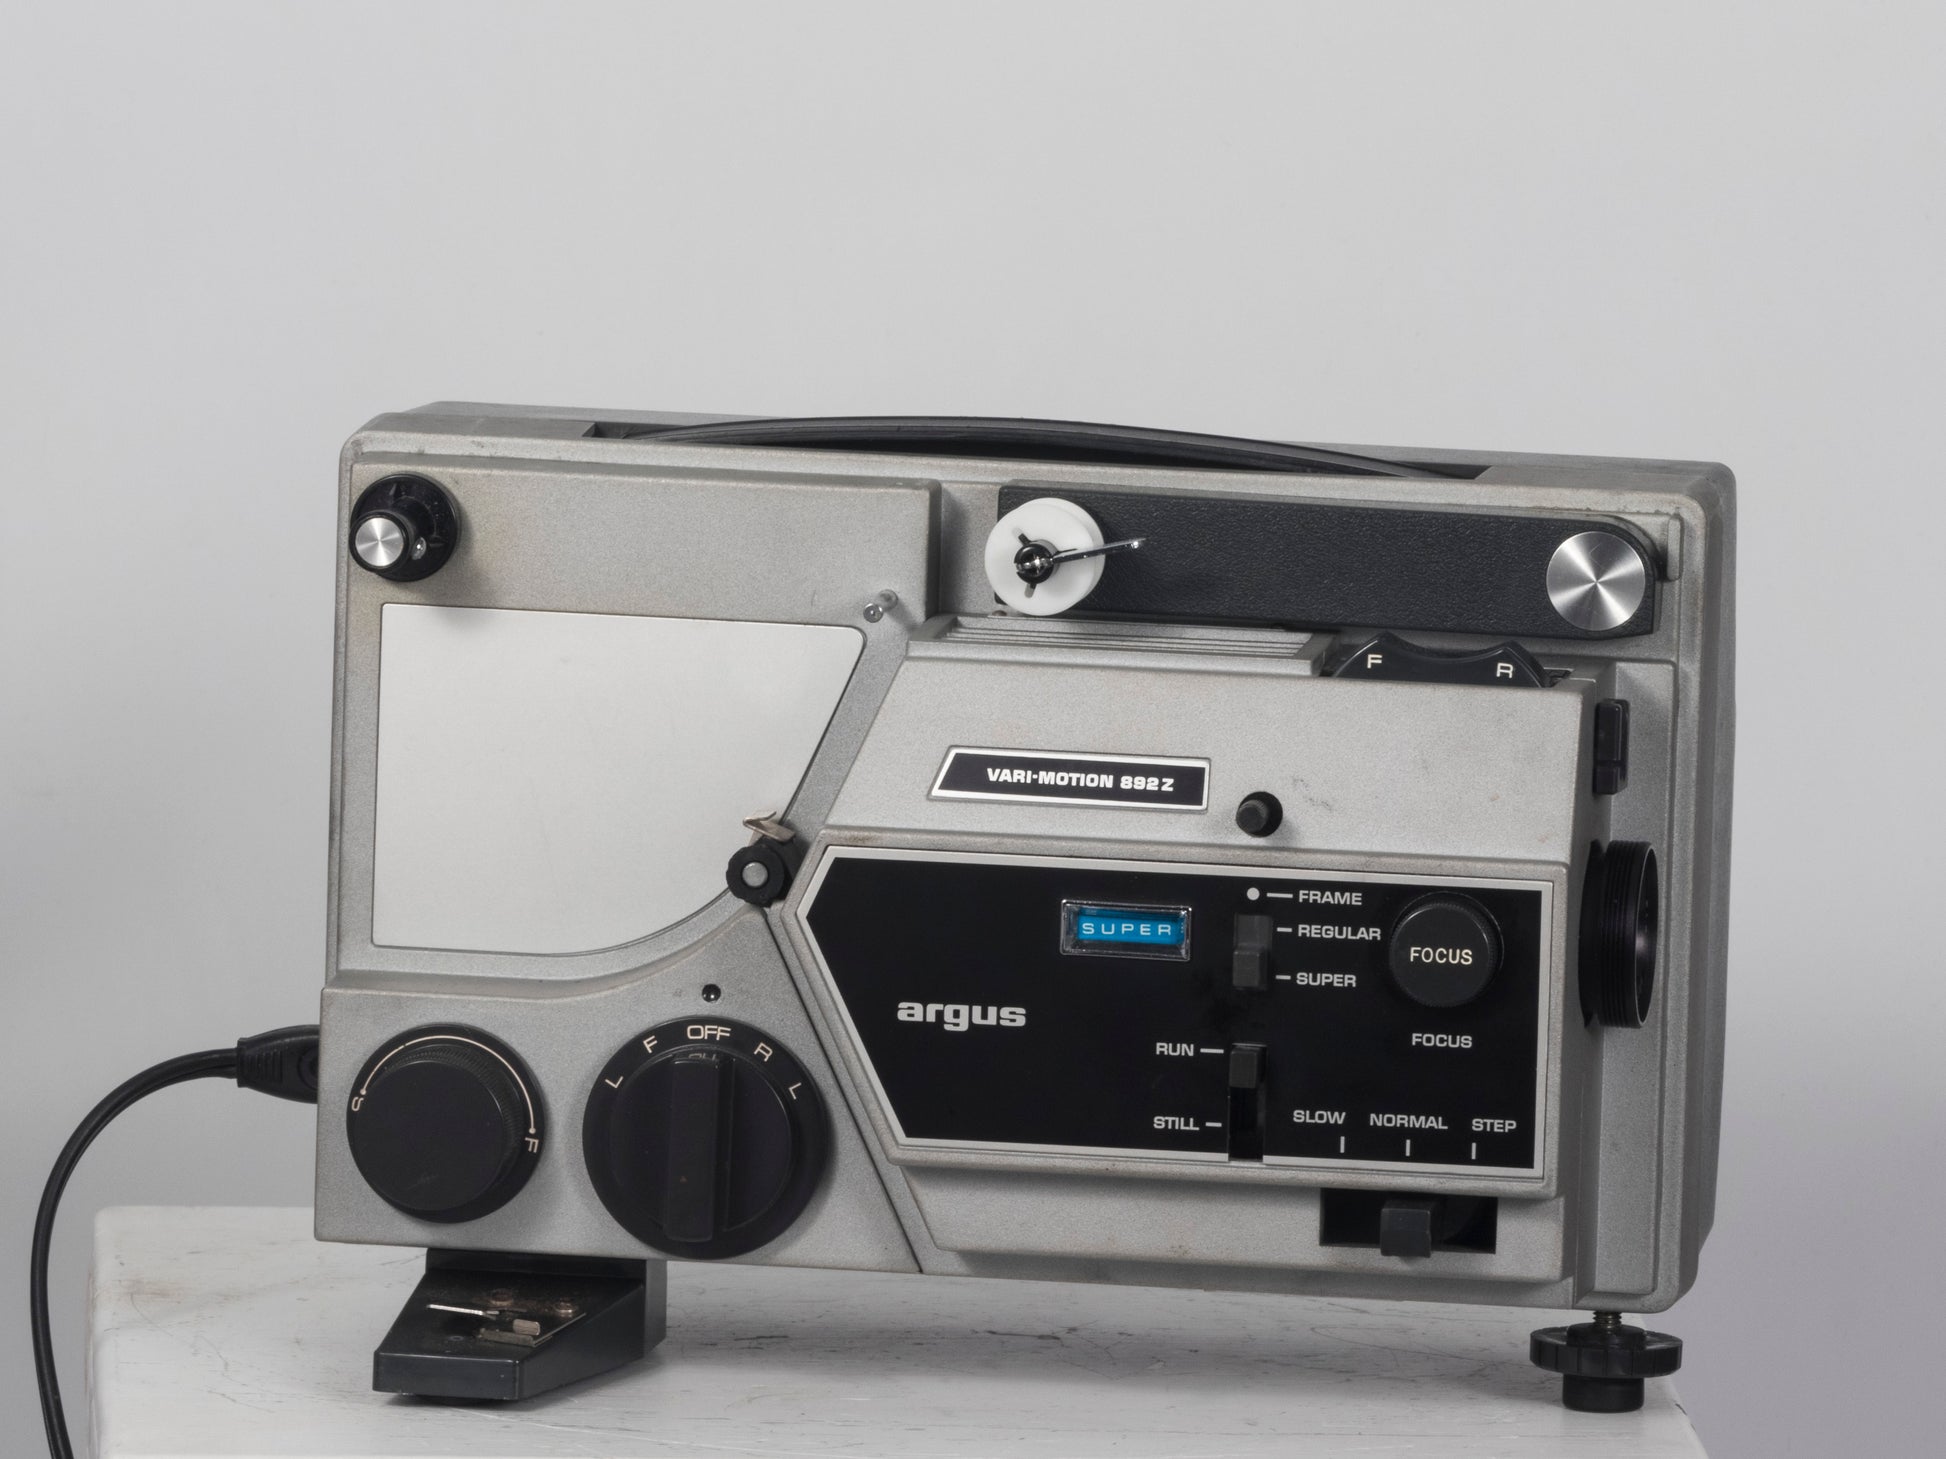 Argus Vari-Motion 892Z 8mm and Super 8 projector